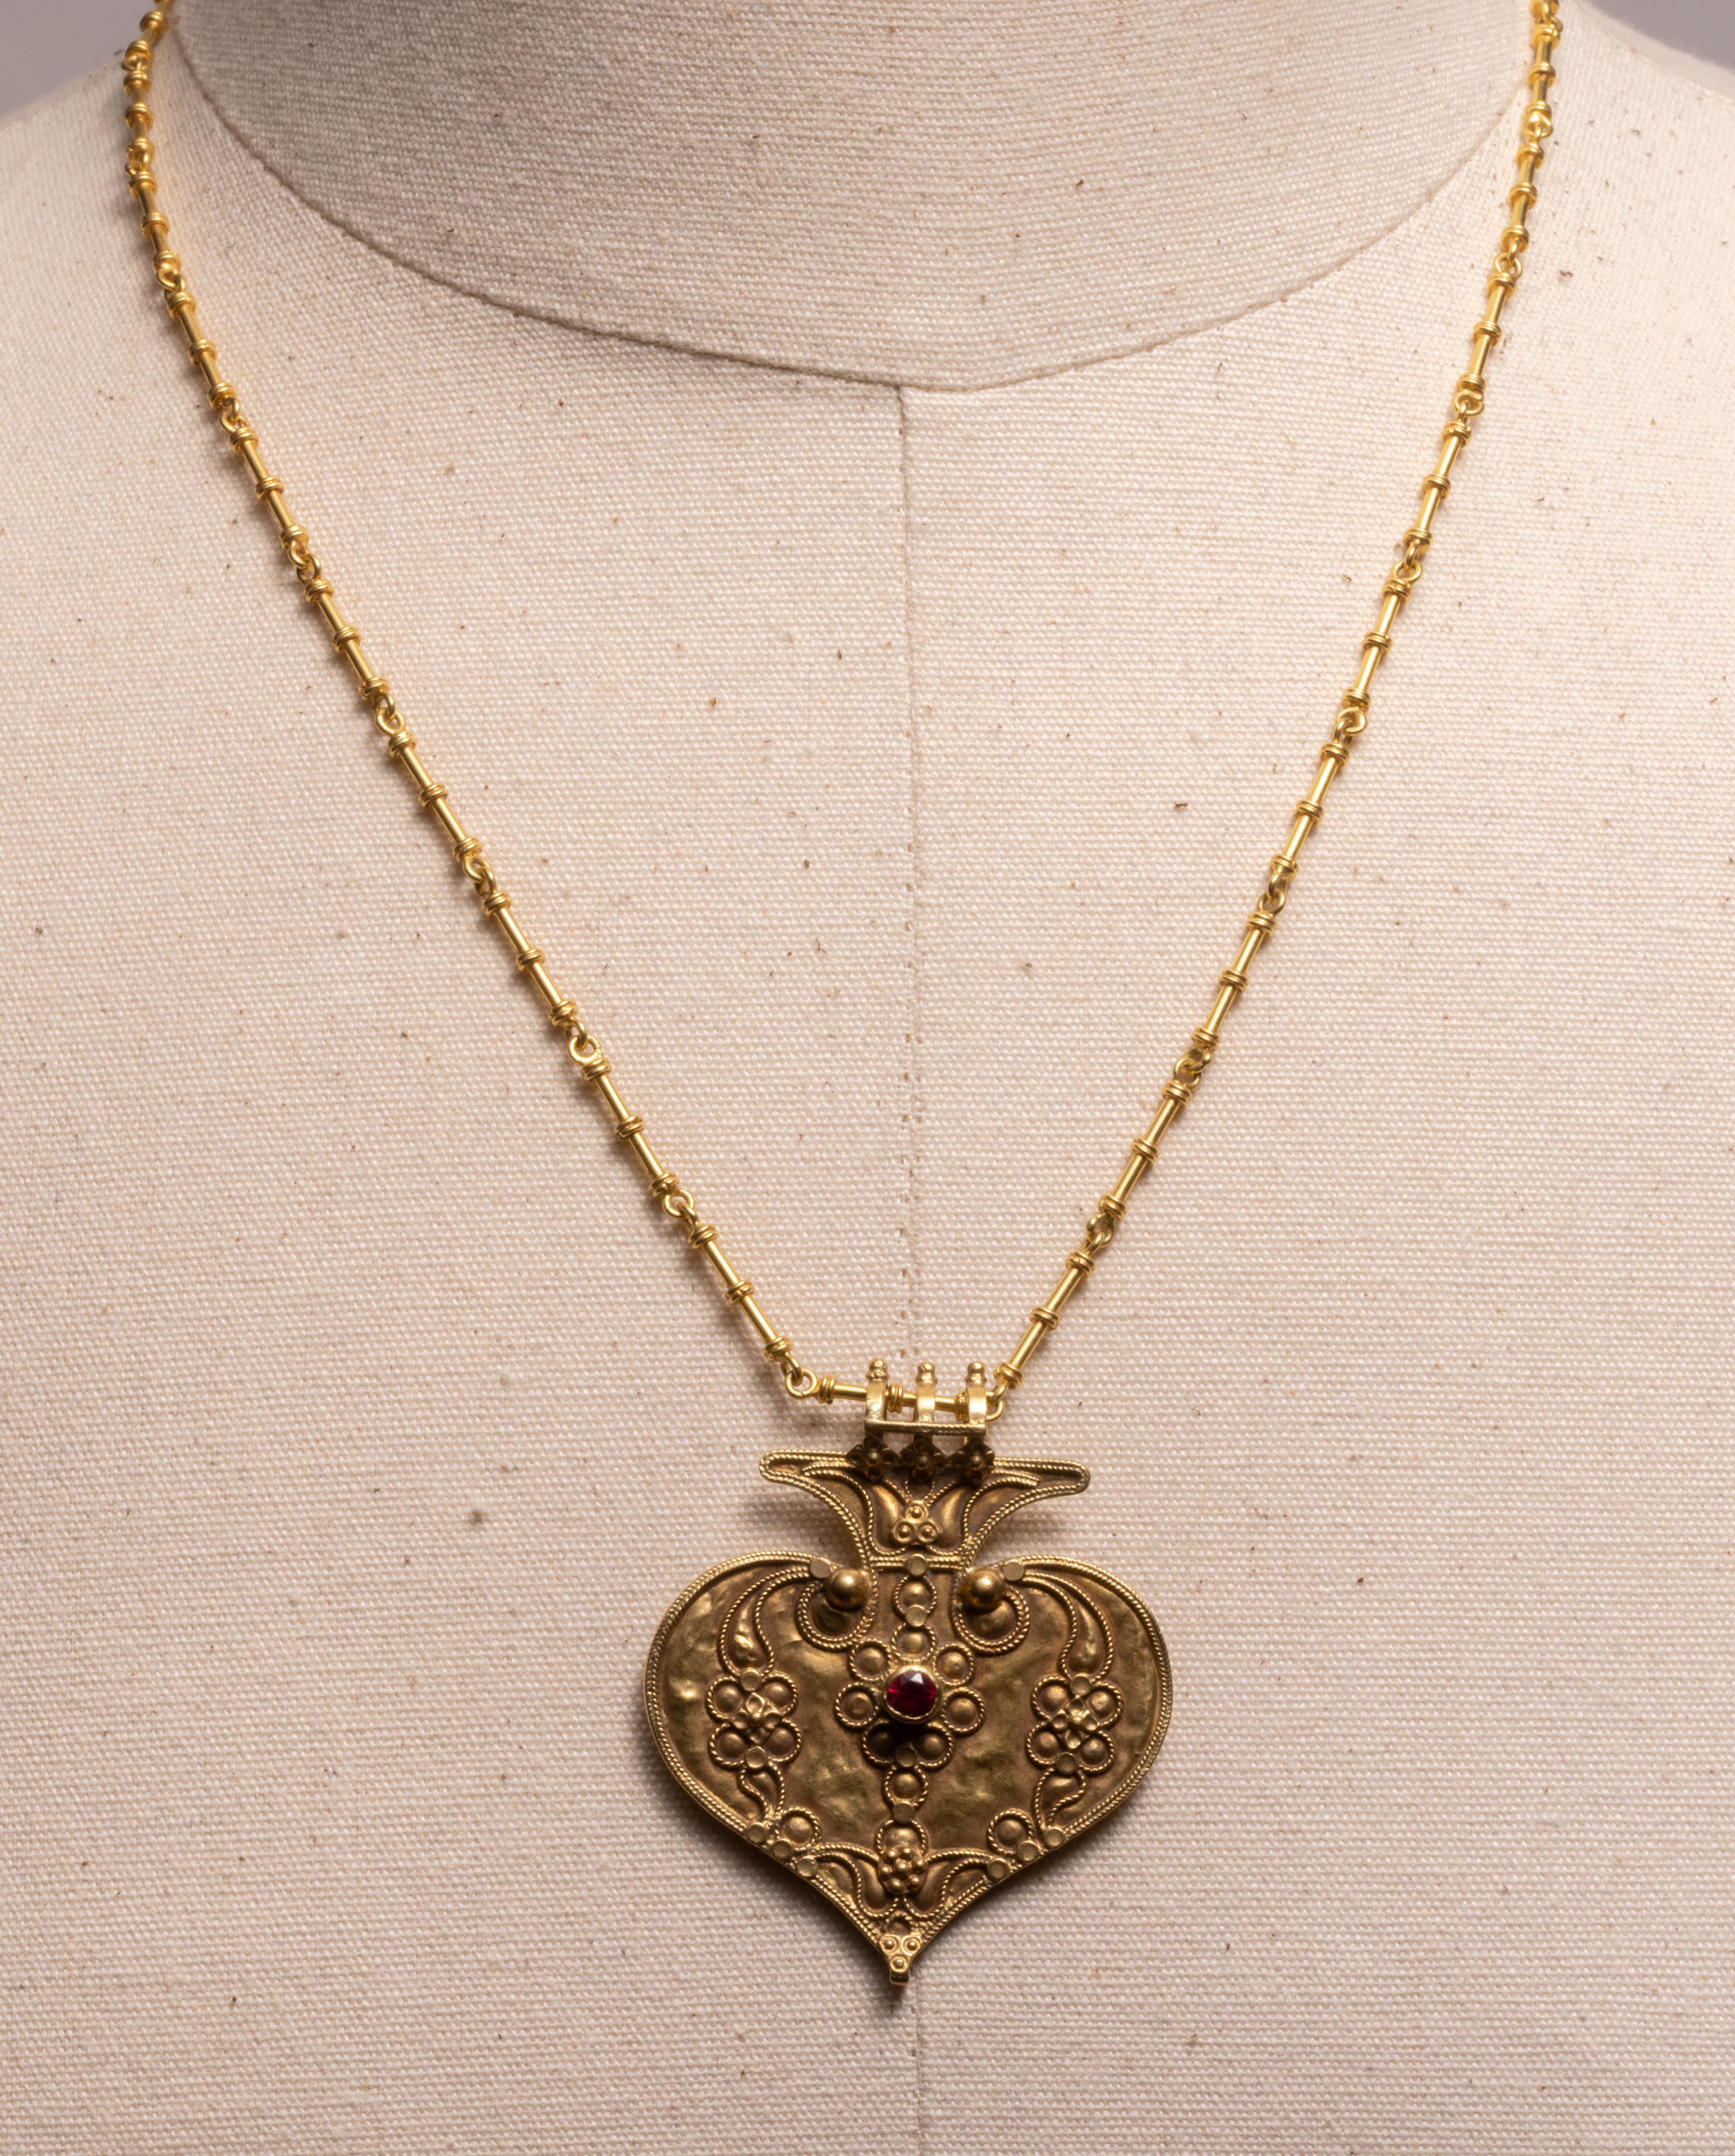 An 18K gold hand-tooled linked chain with an Indian spade-shaped pendant with fine granulation work and hand tooling.  A round pink spinel is set in the middle of the pendant.  The pendant itself measures 2